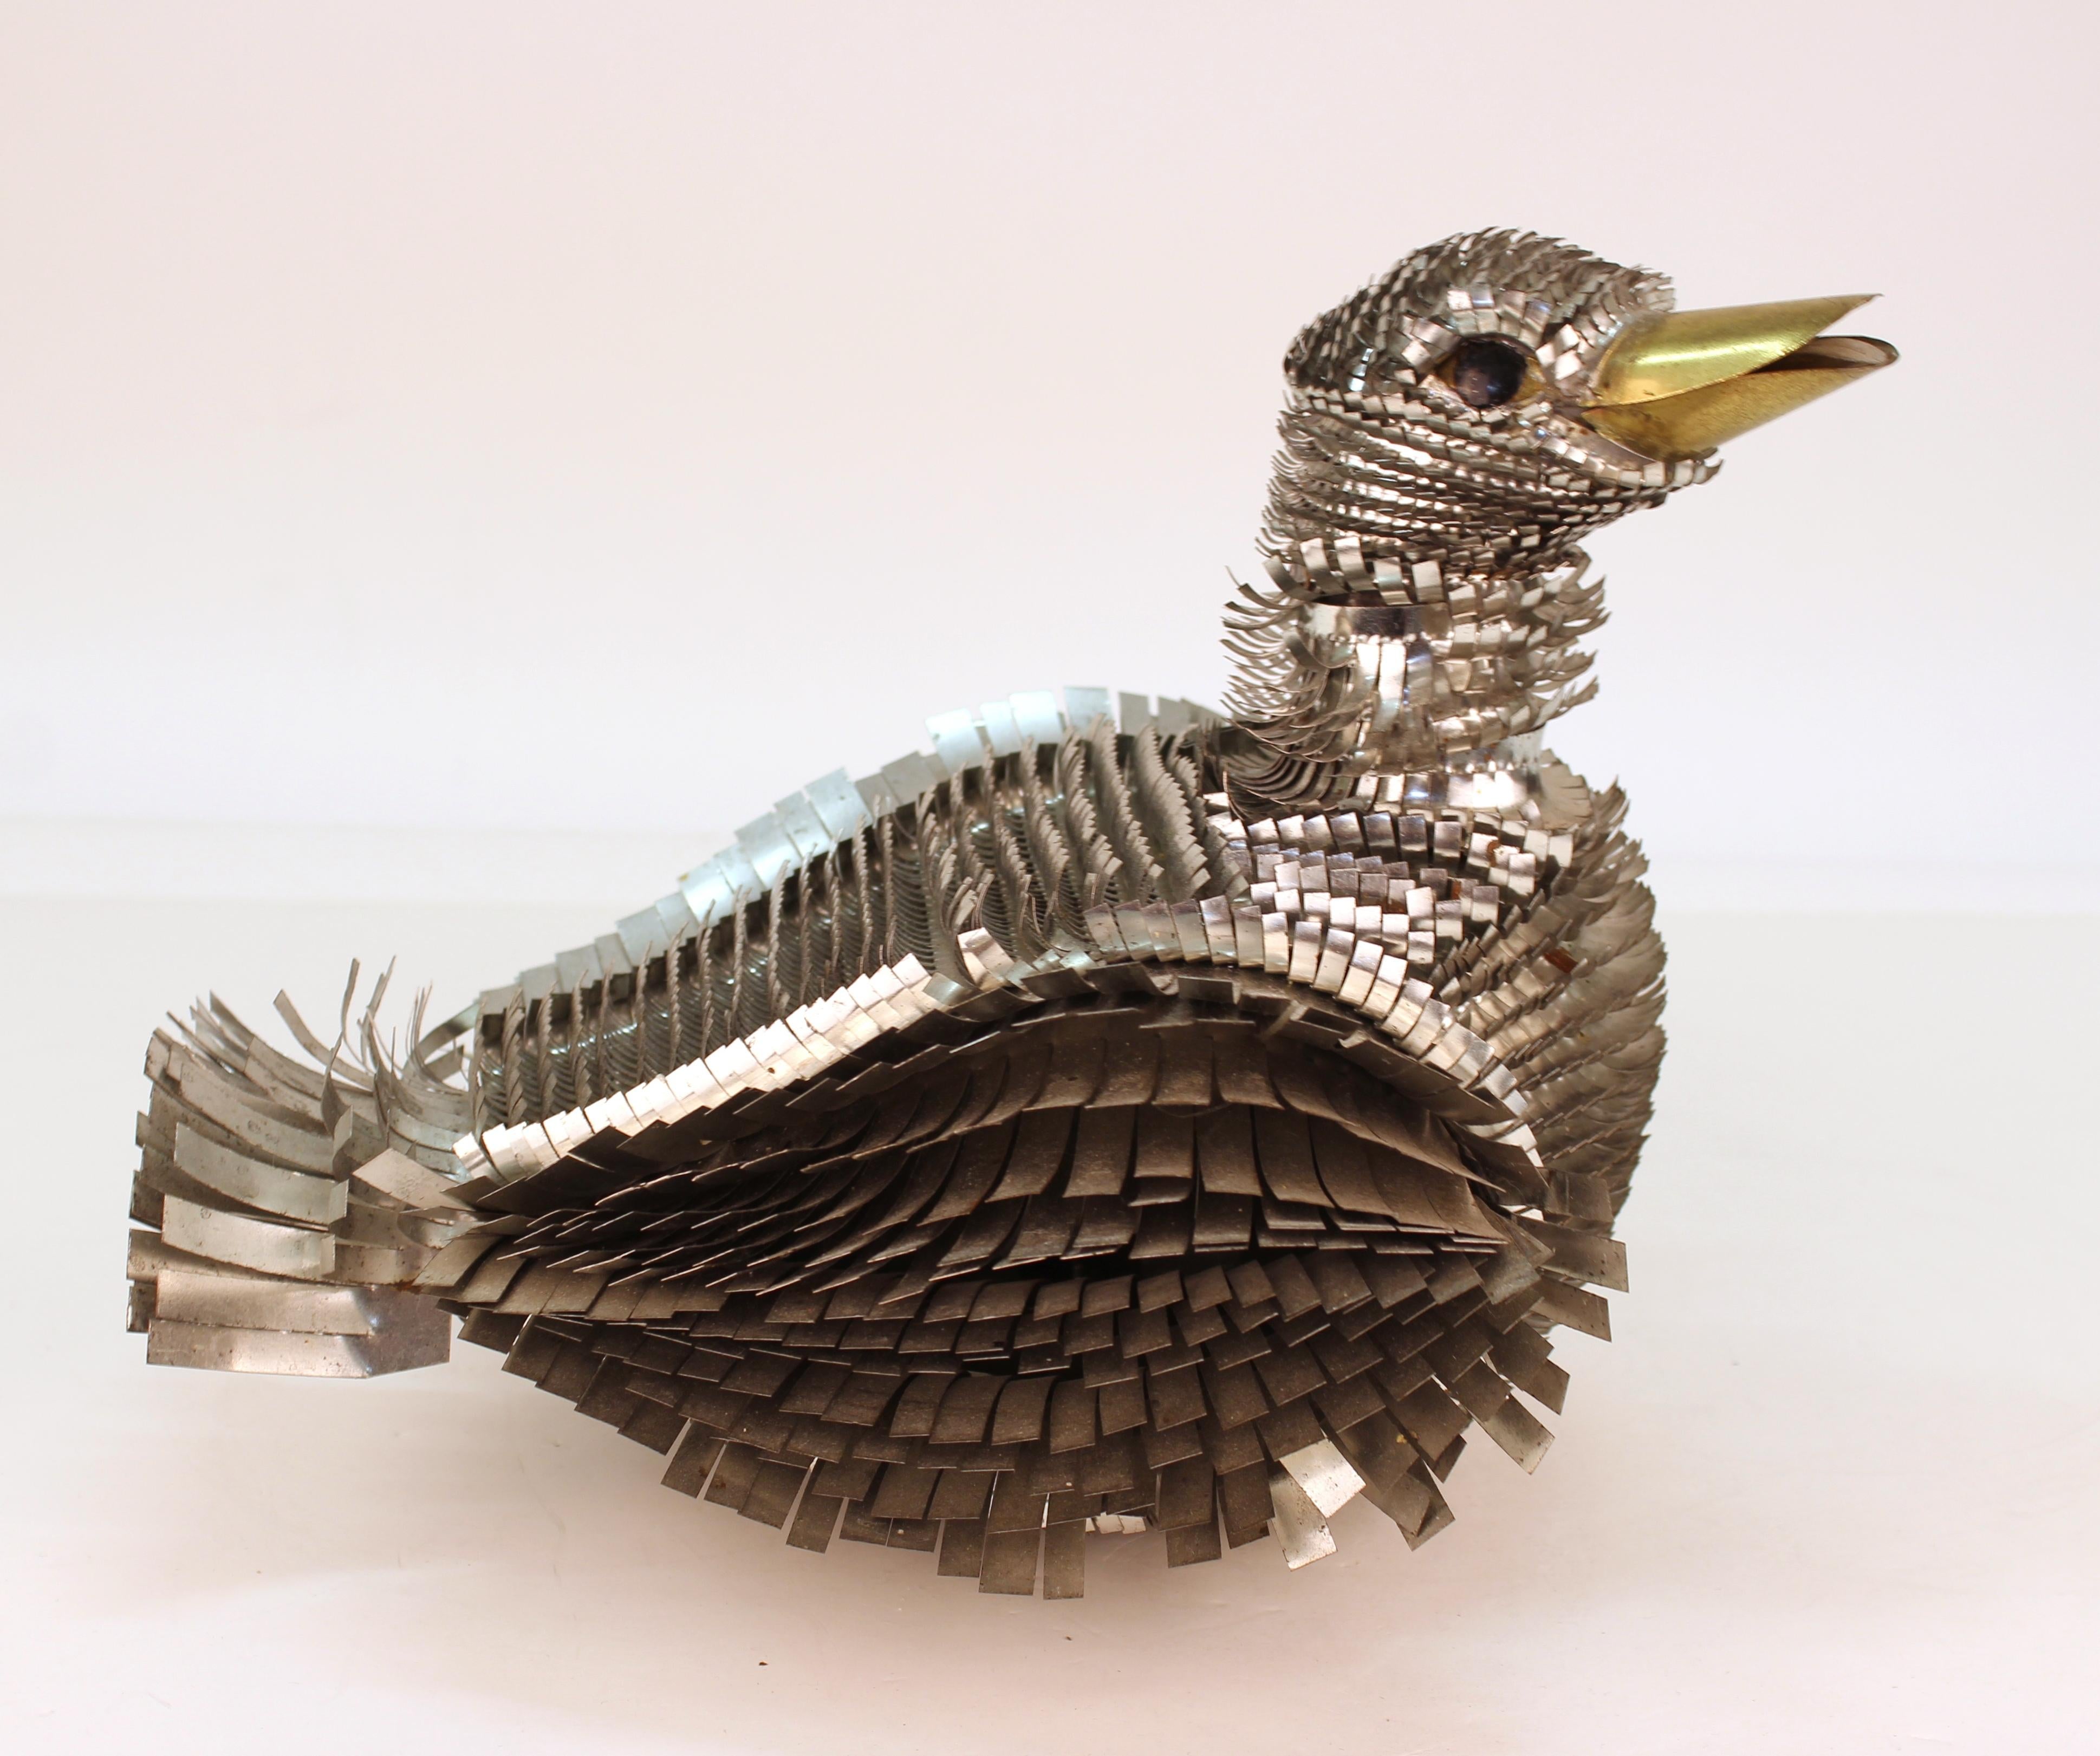 Mid-Century Modern duck sculpture made in metal by A. Blazquez. The piece was created in Mexico in the mid-20th century and is in great vintage shape. The duck appears to have had legs originally.